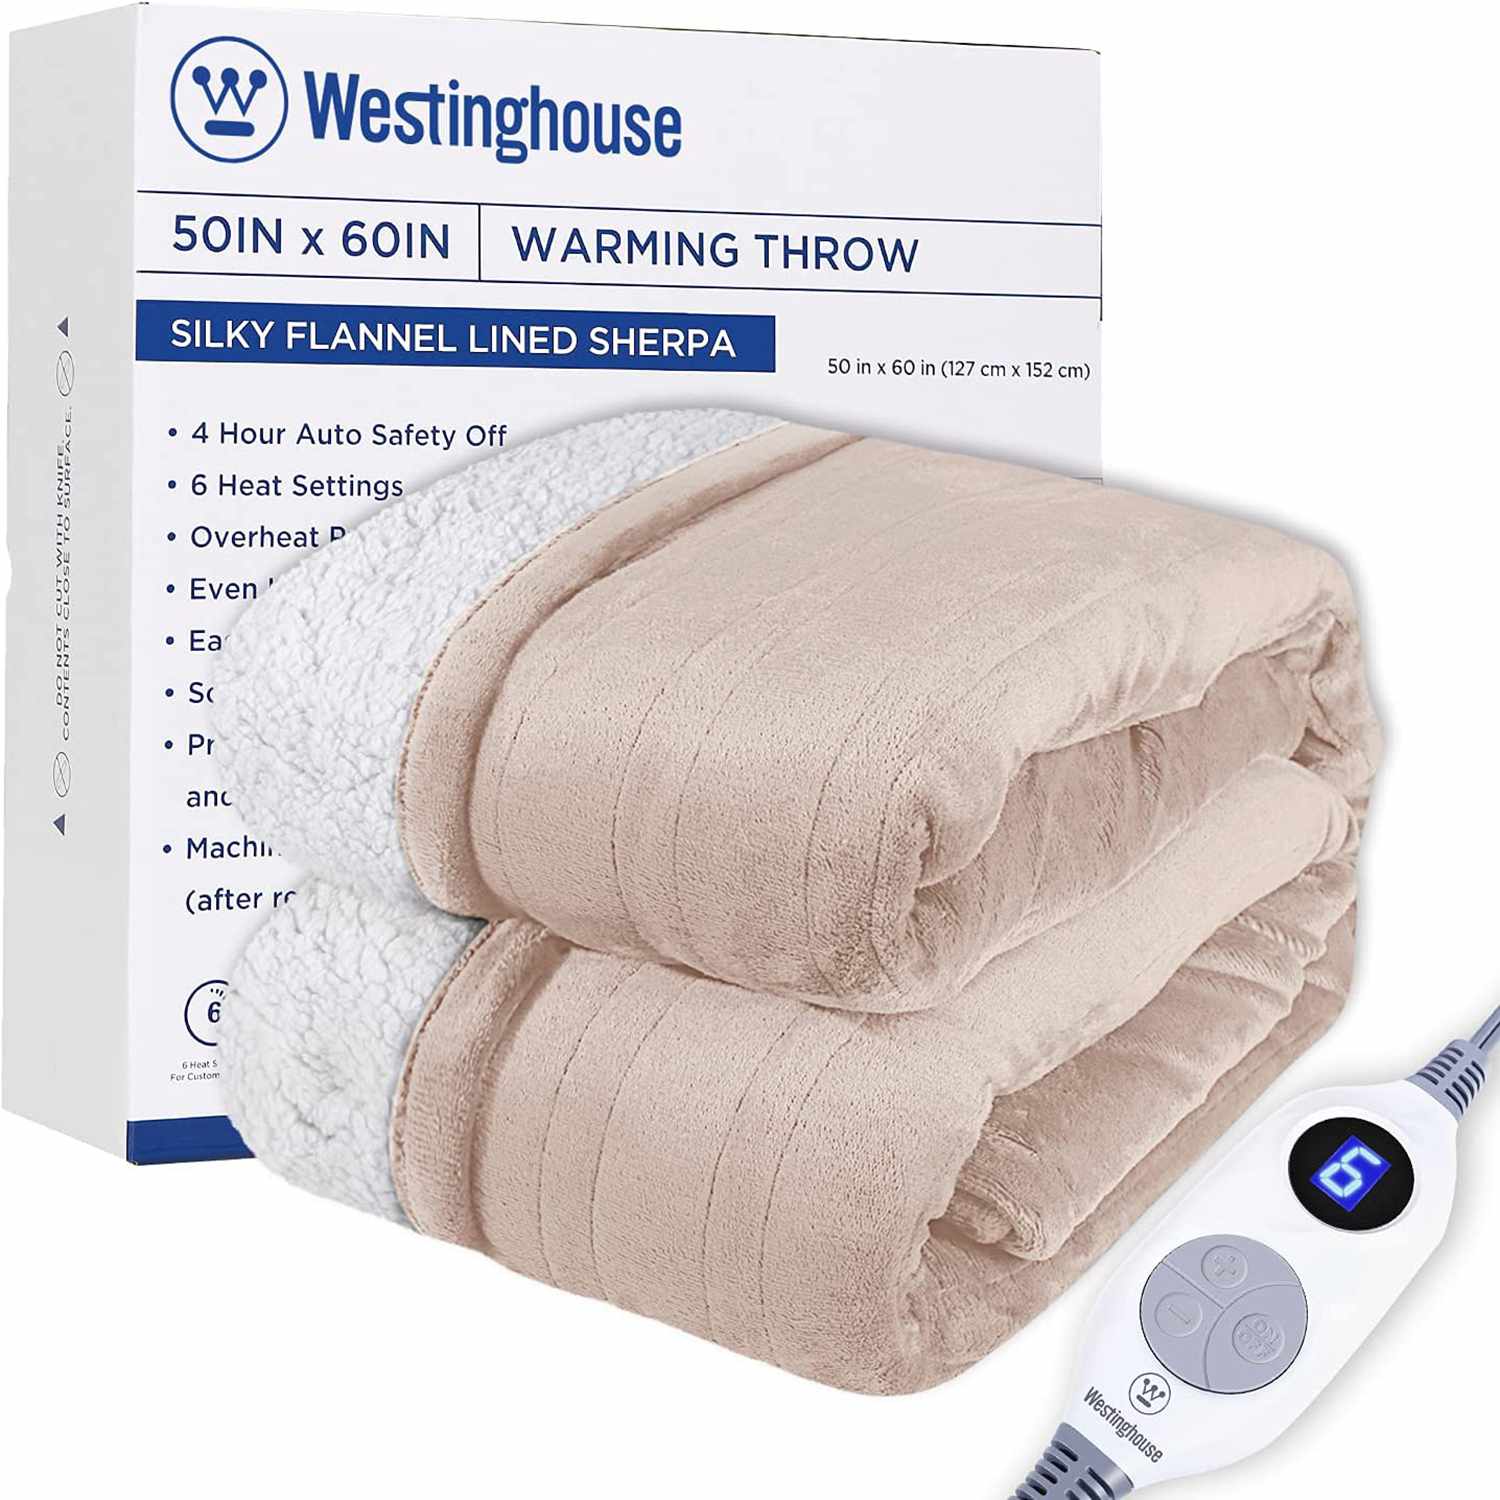 FiNeWaY@ New Single Size 120cm x 60cm Pure Luxury Soft Comfort Washable Warm Electric Heated Under Blanket with Single Remote Control and 3 Heat Settings